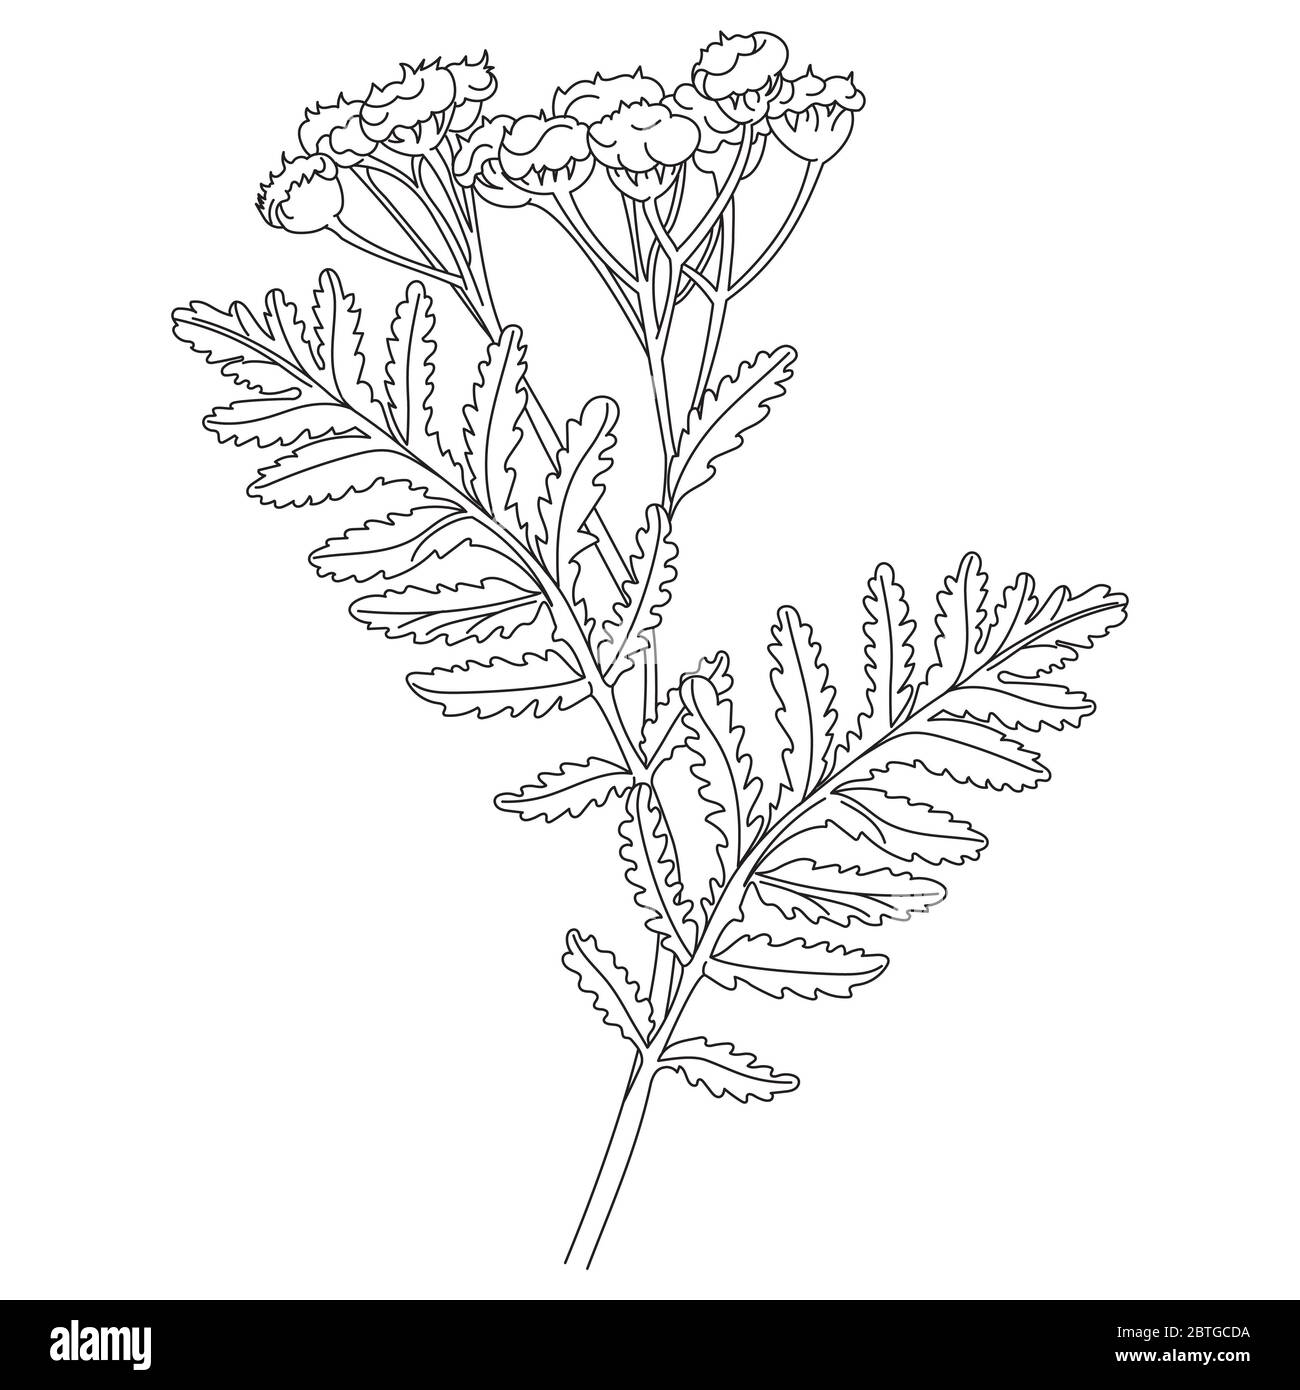 Tansy or daisy flower. Botanical illustration. Good for cosmetics, medicine, treating, aromatherapy, nursing, package design, field bouquet. Hand draw Stock Photo